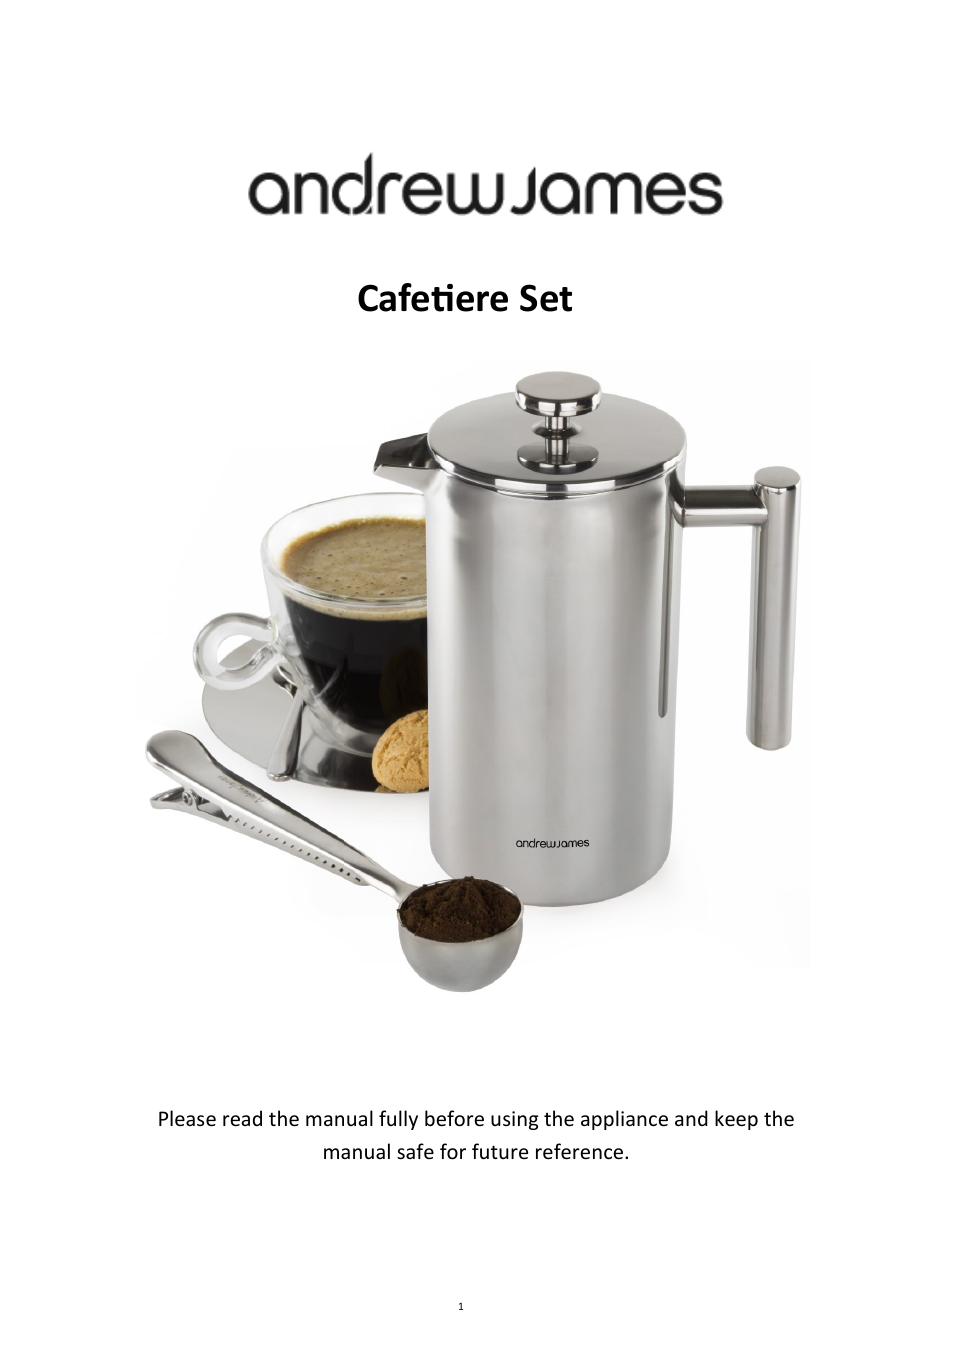 AJ000351 1000ml Cafetiere and Measuring Spoon